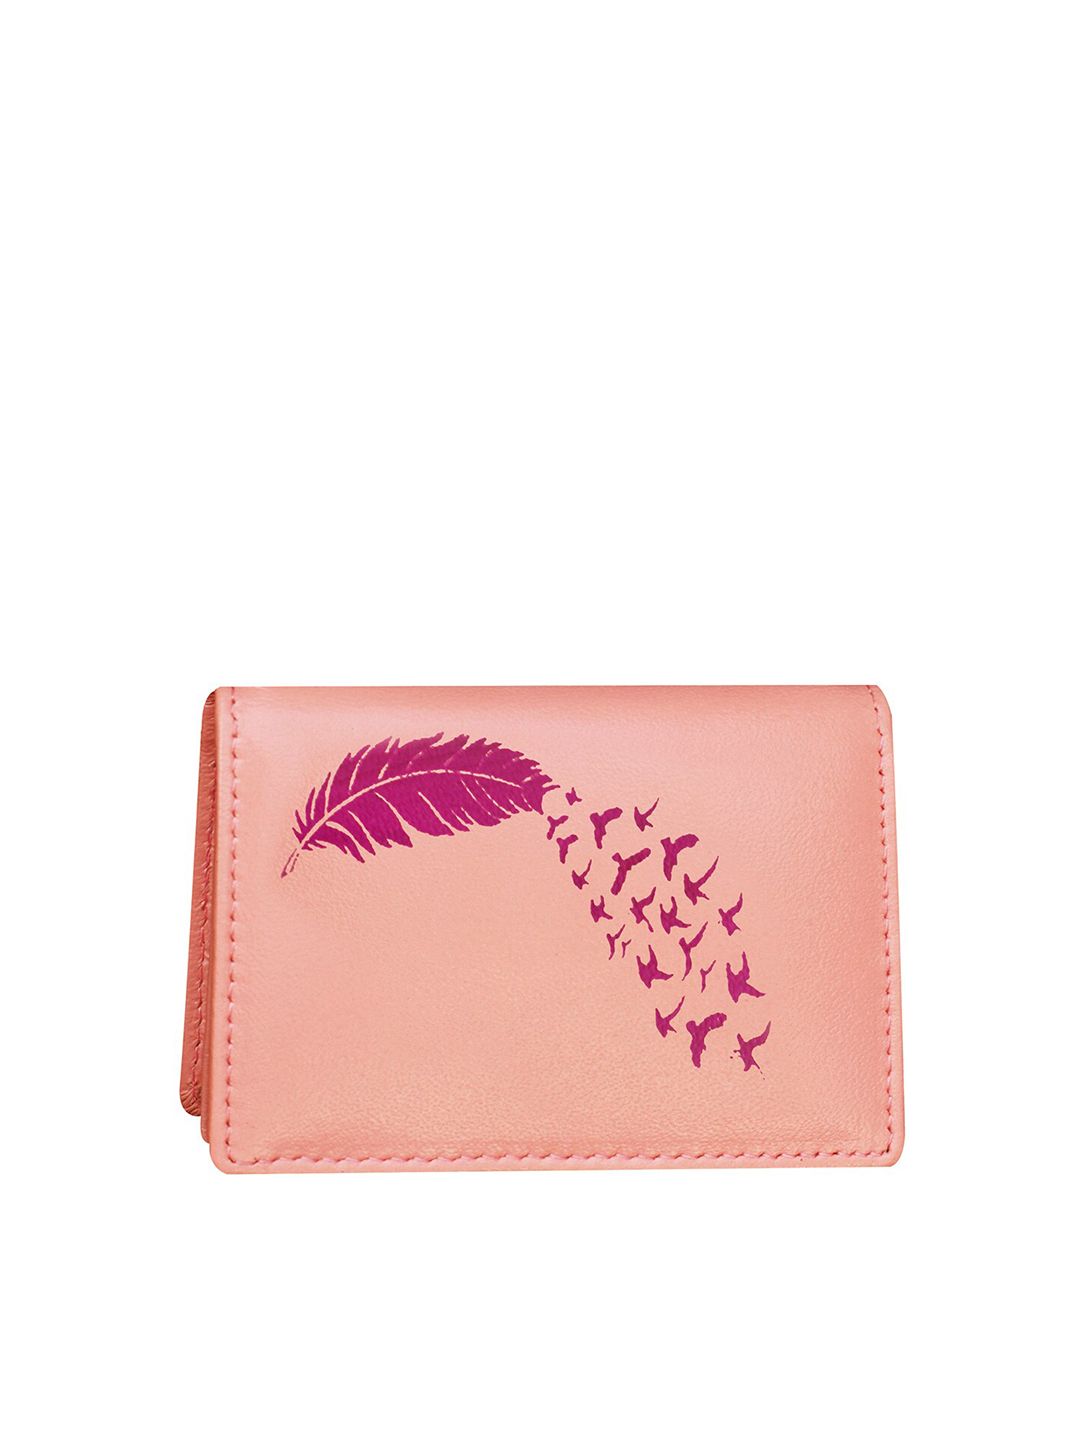 ABYS Unisex Pink Printed Two Fold Leather Wallet Price in India